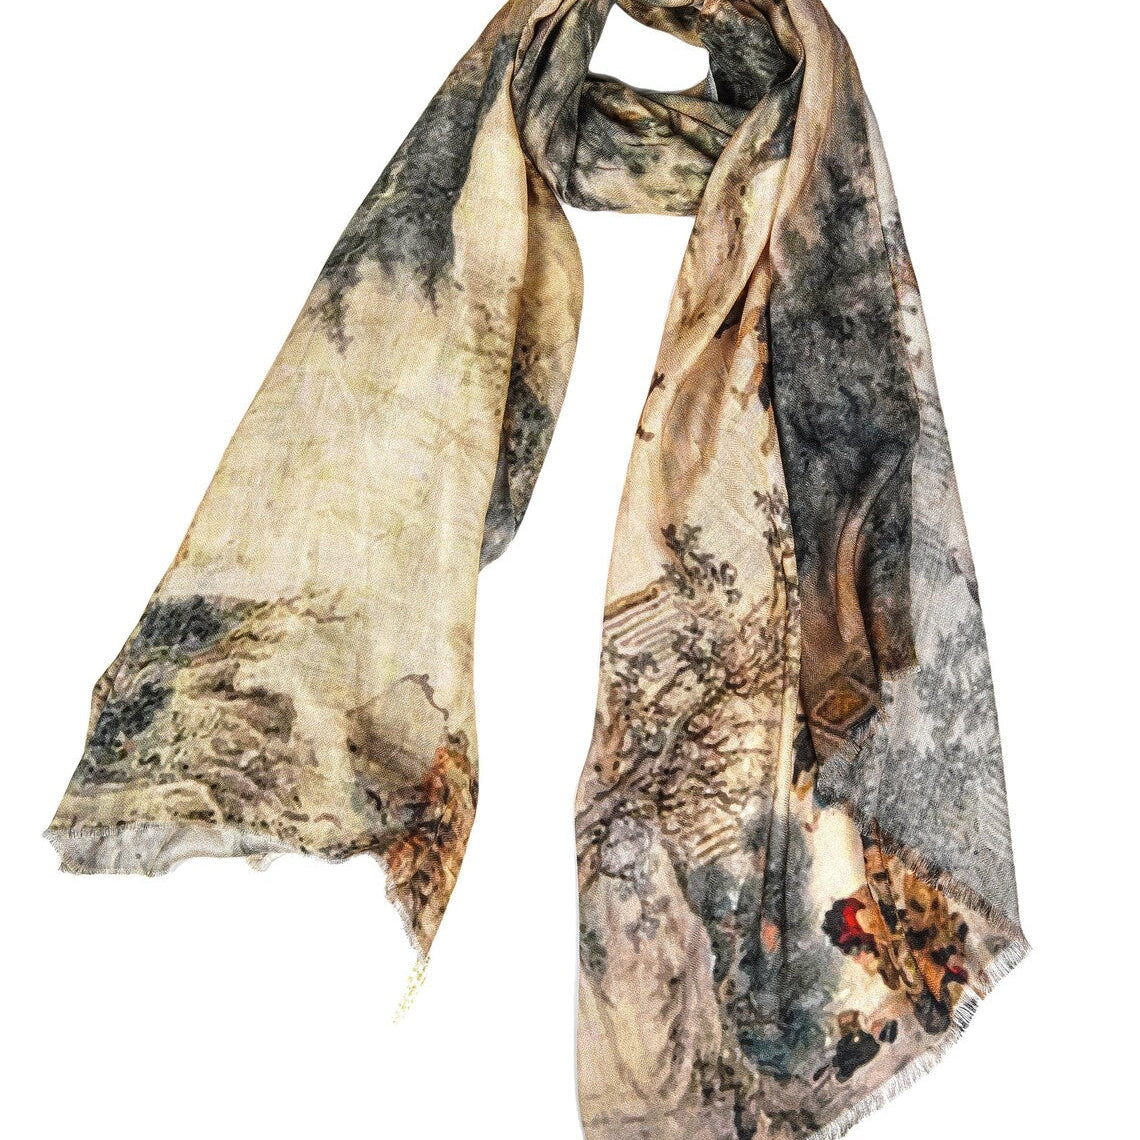 Silk Modal Scarf, long all season scarf in luxurious fabric blend, shawl and wrap, accessories for women, gifts for her, summer scarf, shawl - Beige/Grey